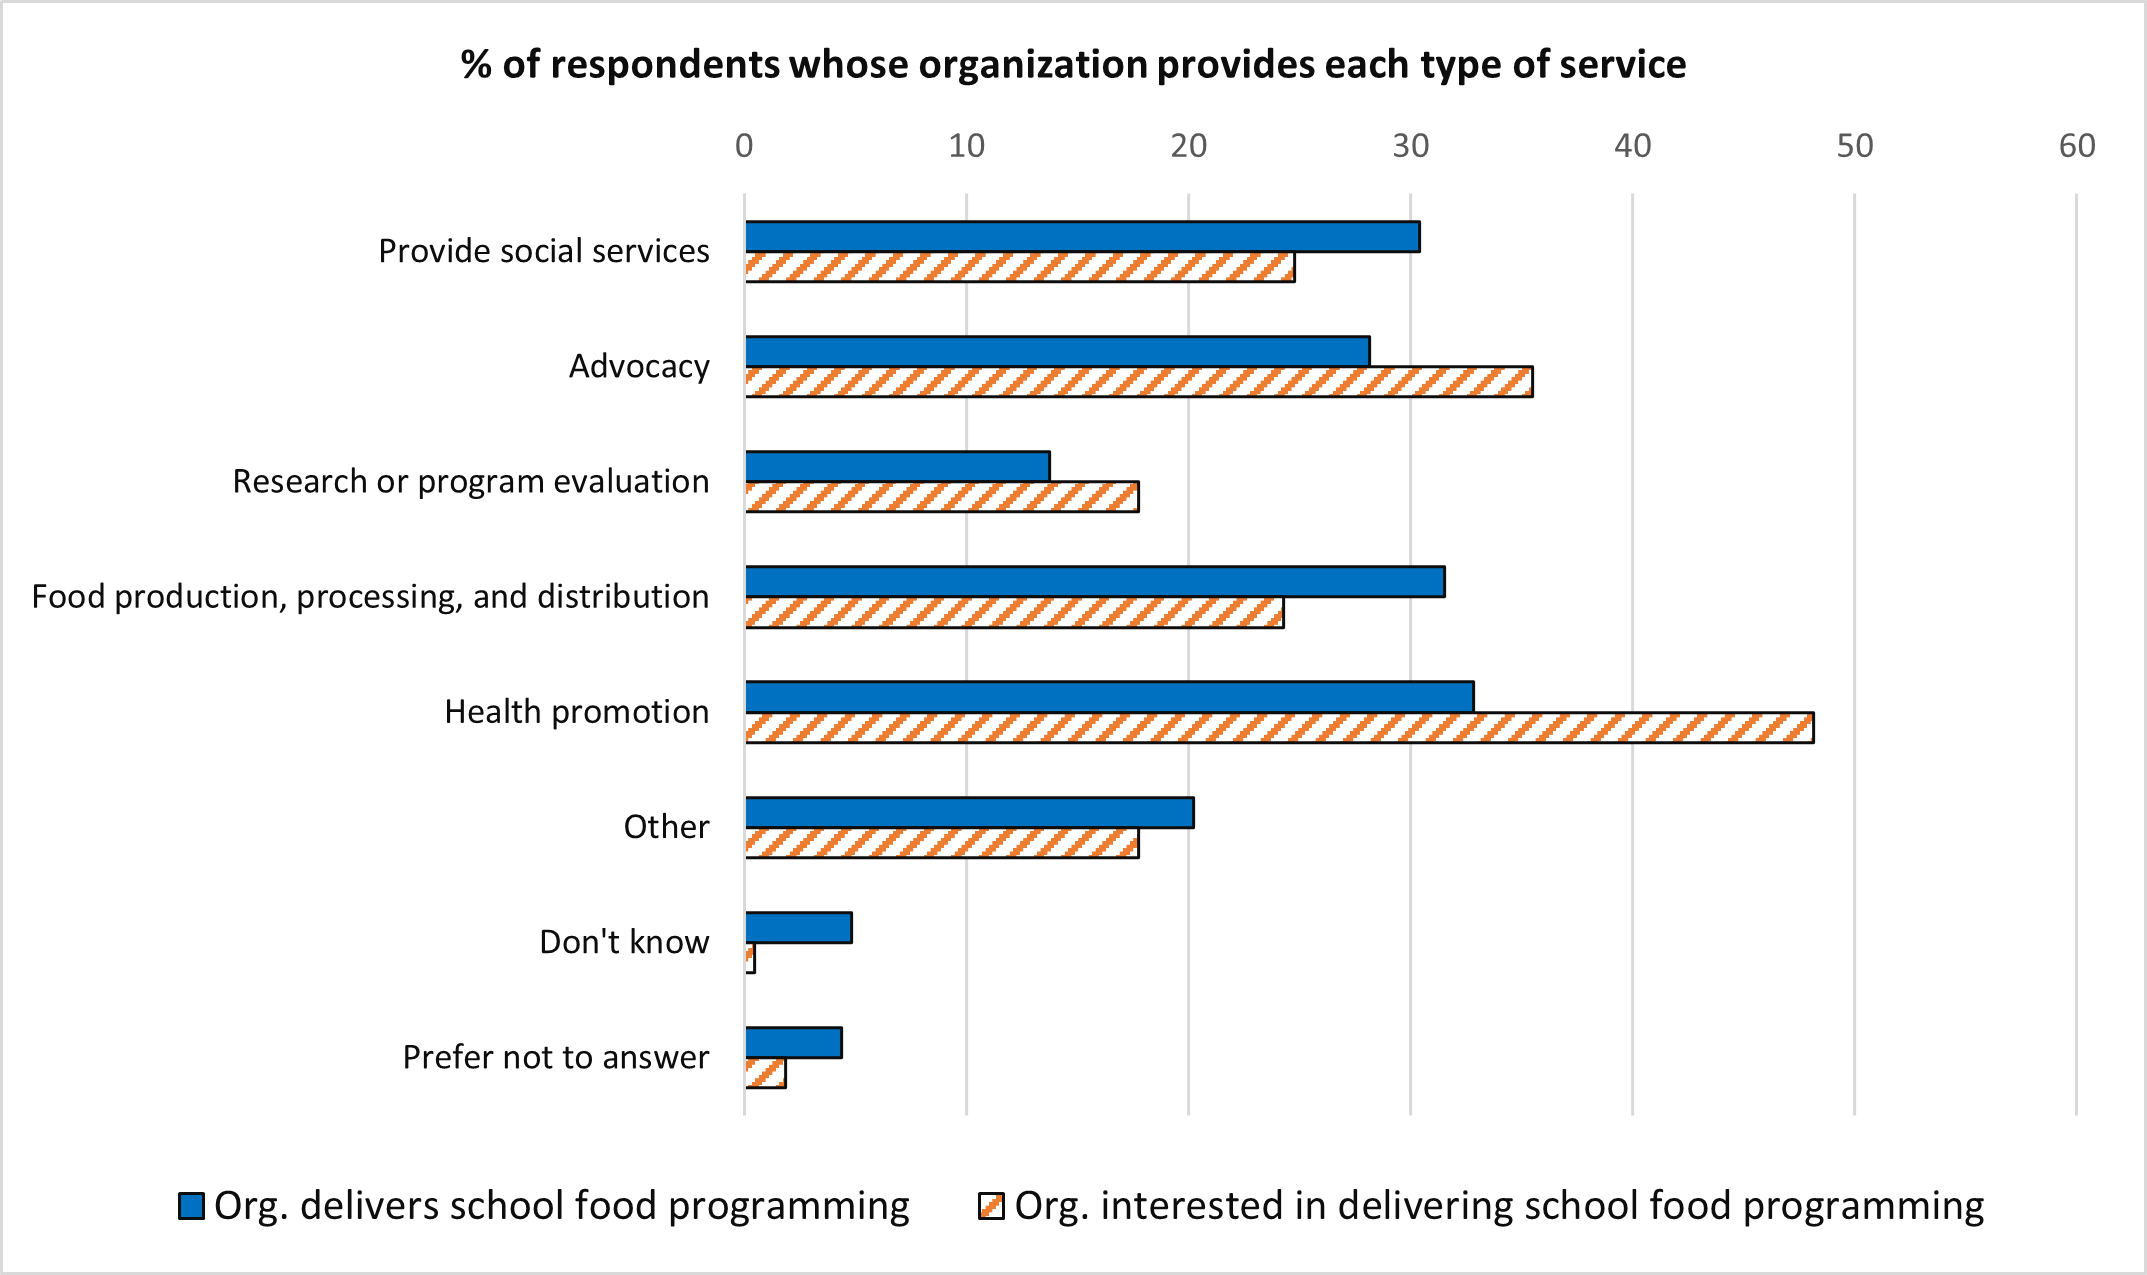 A bar chart of the percent of respondents whose organization provides each type of service. Text version below.